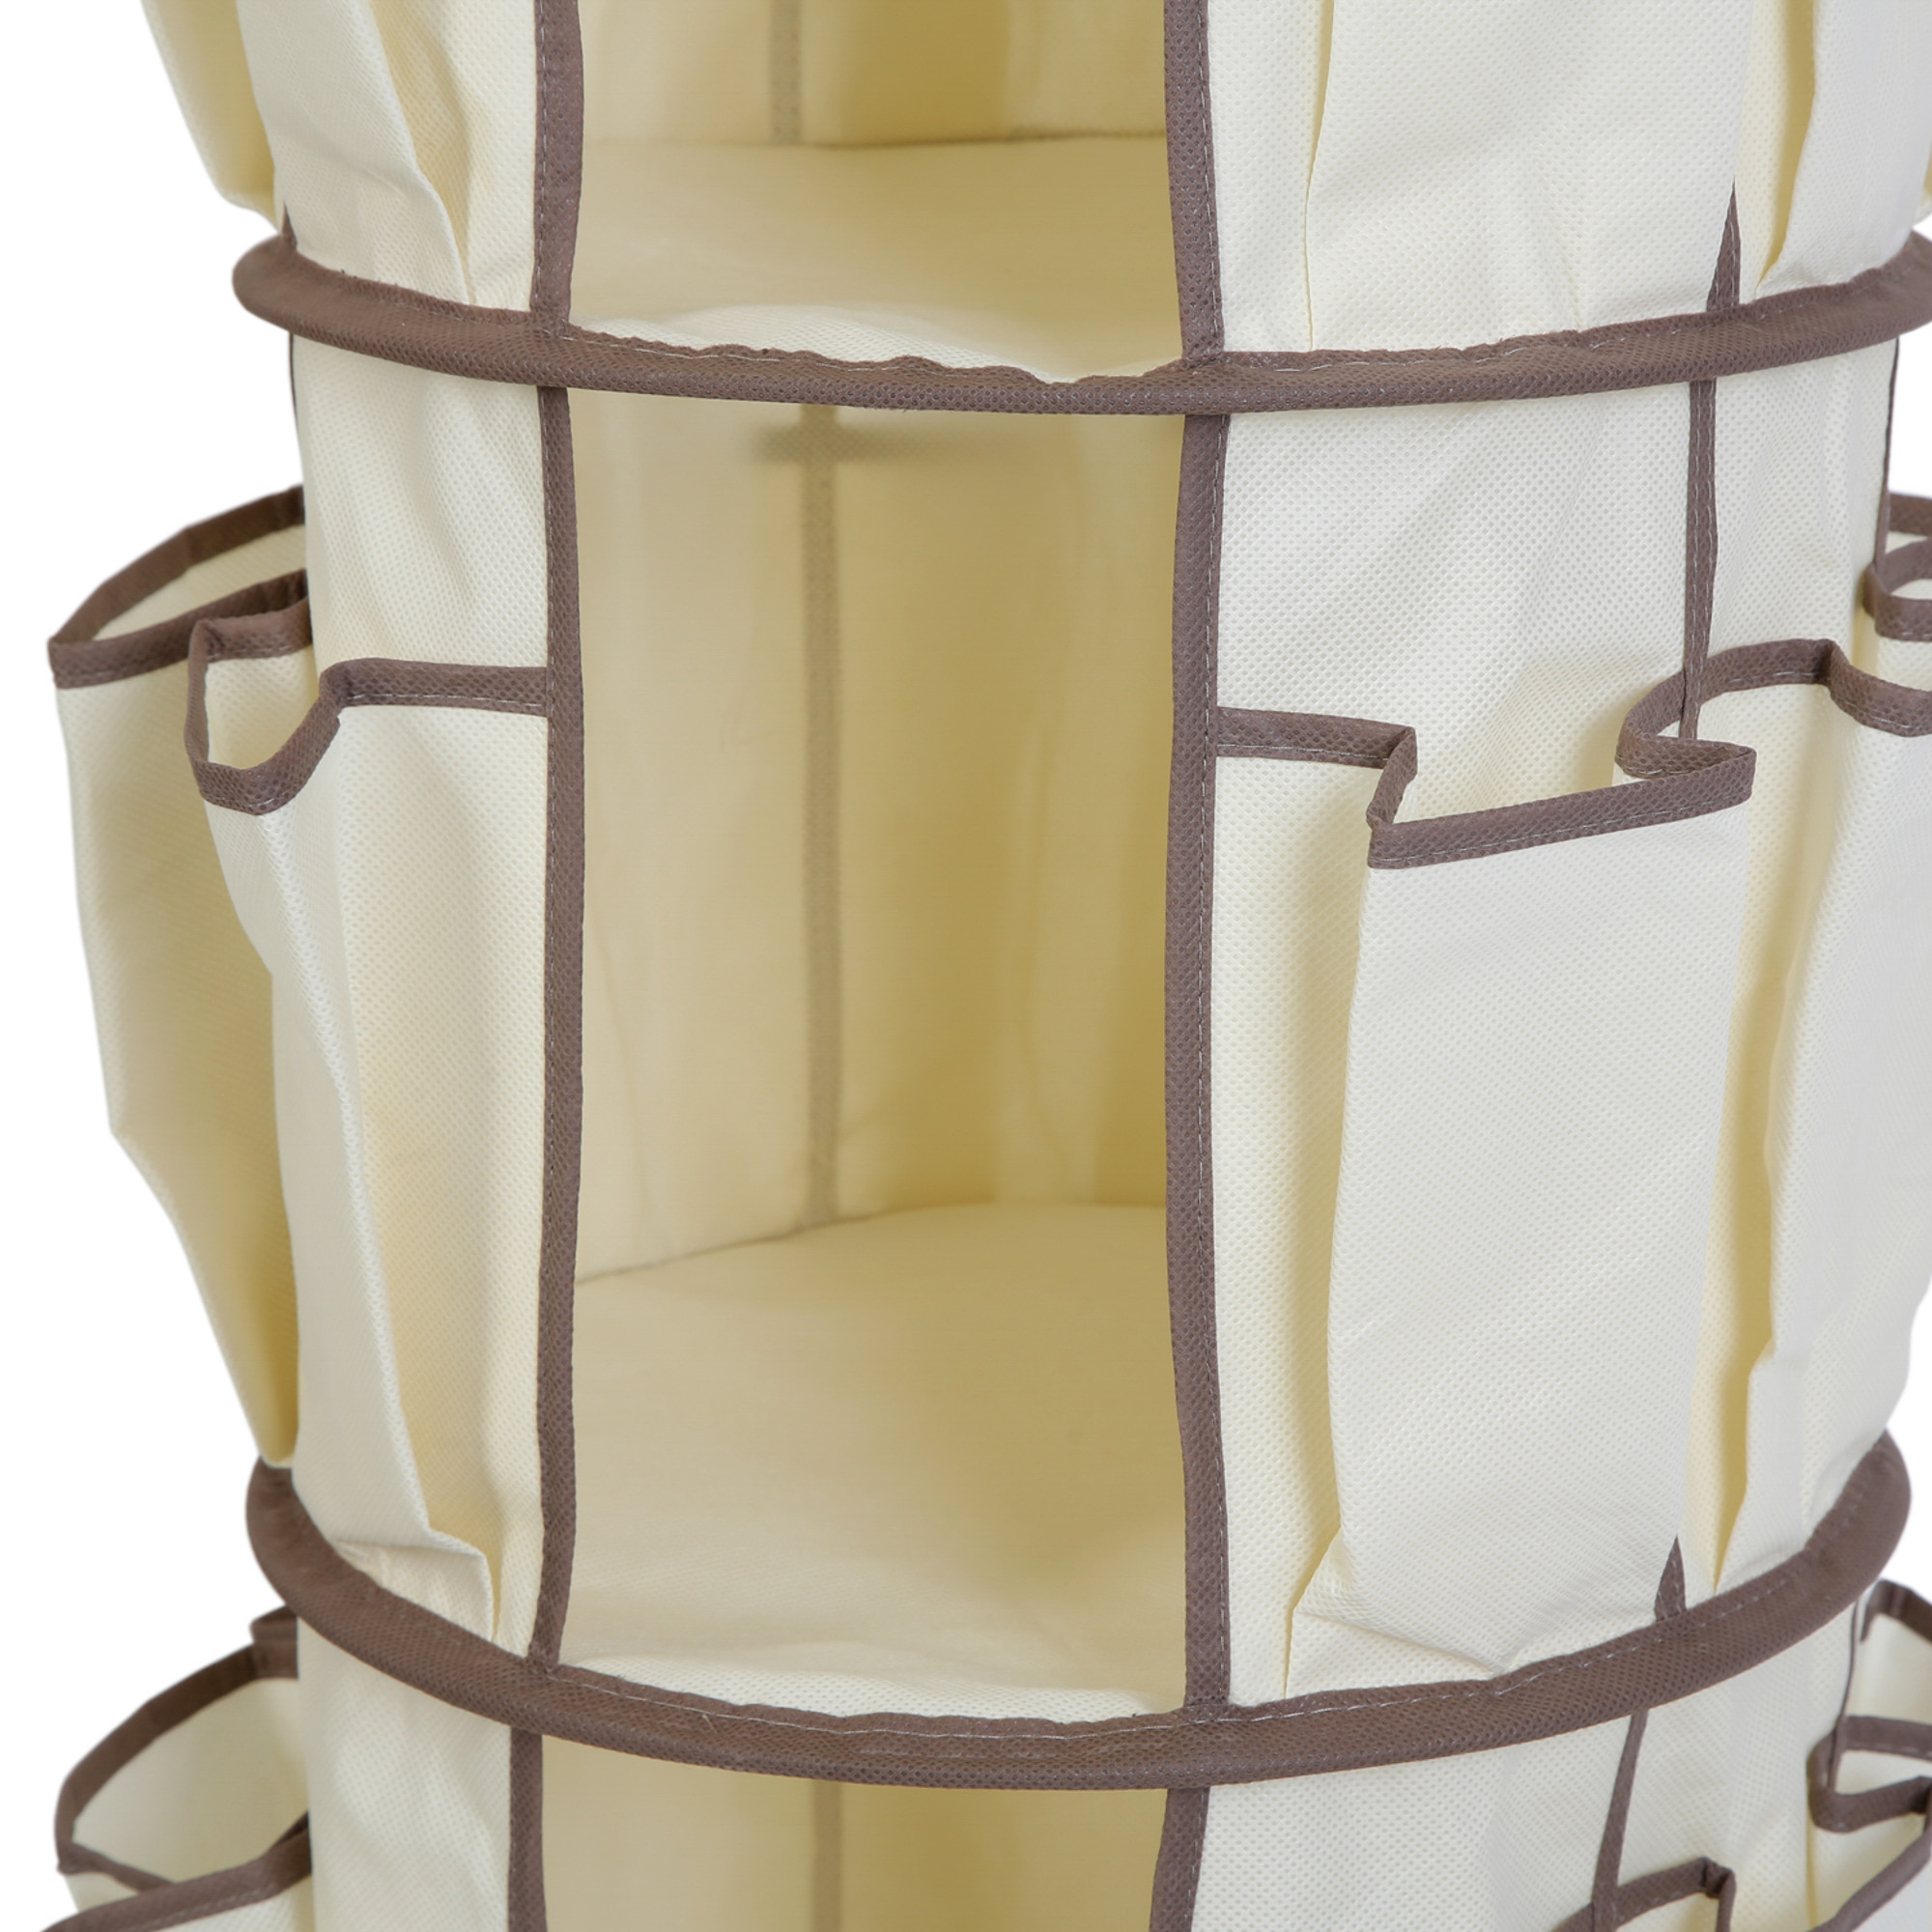 Smart Design 5-Tier Hanging Carousel Organizer with 40 Pockets and Steel Metal Hook - 13 x 51.8 inch - Beige - image 4 of 5